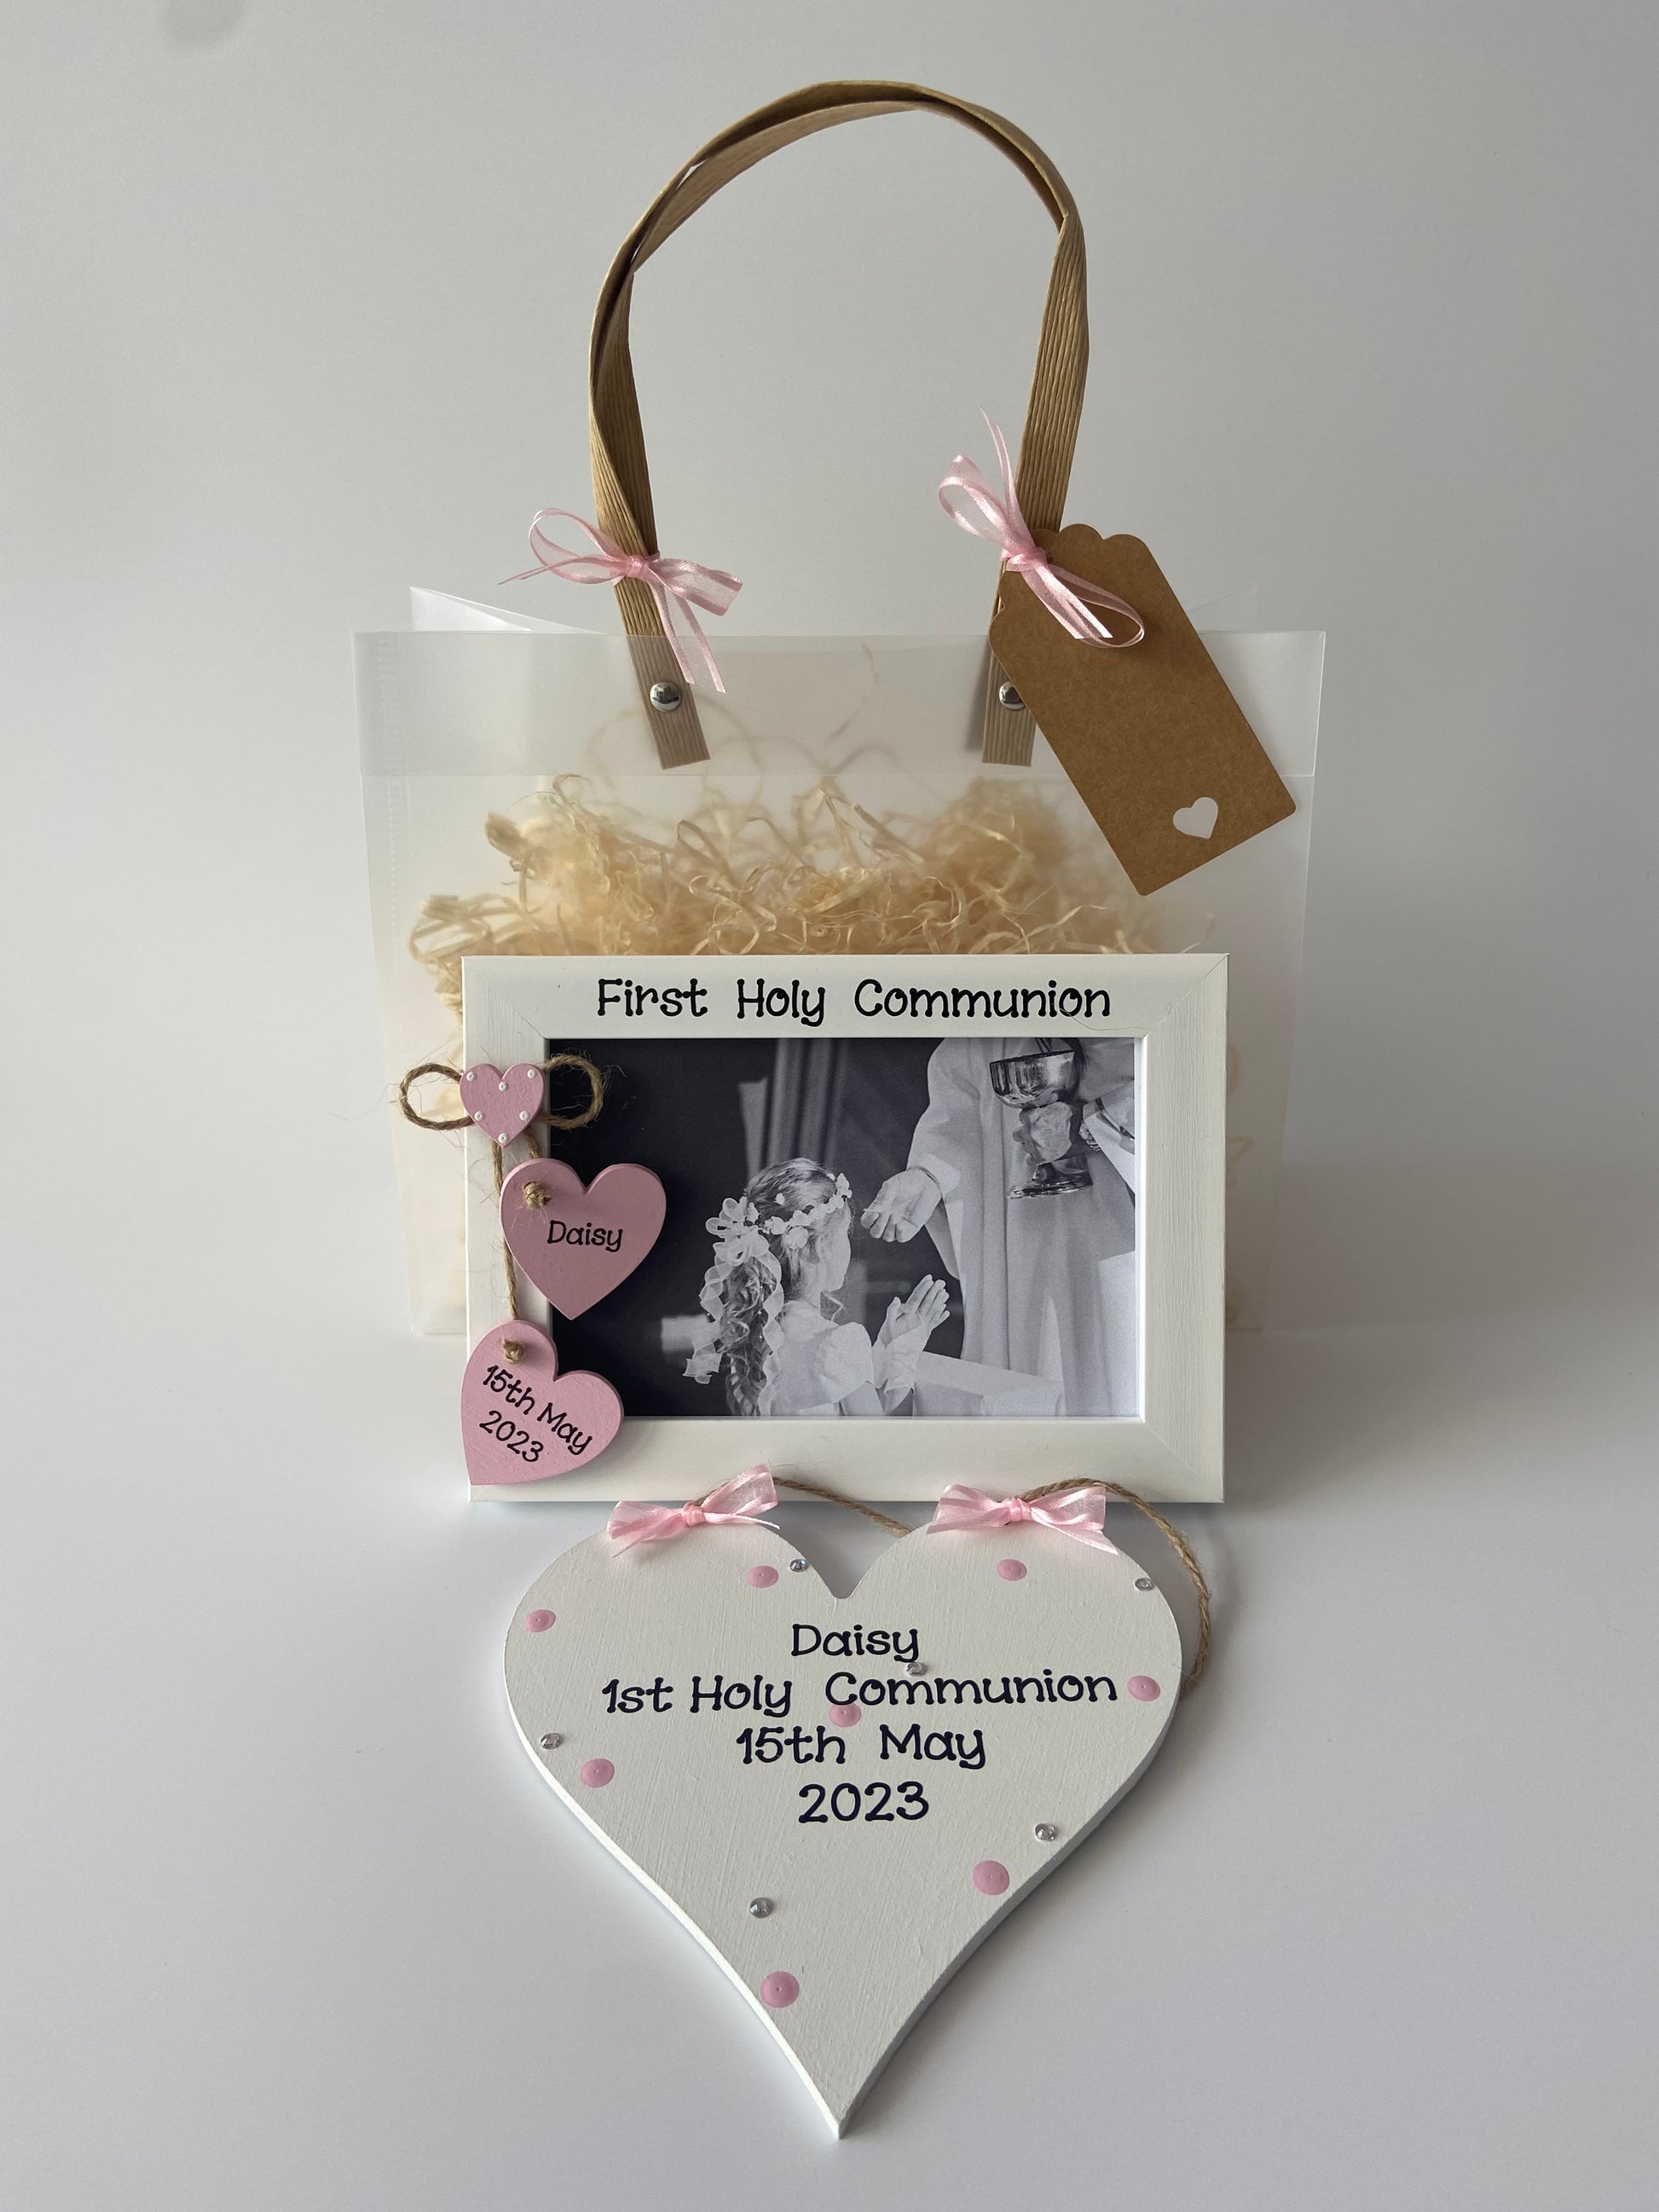 Image shows photo frame and plaque included in this gift set, plaque decorated with polka dots, gems and ribbon, frame with two hearts with name and date and a smaller heart with polka dots, included photo of your choice and gift wrap.